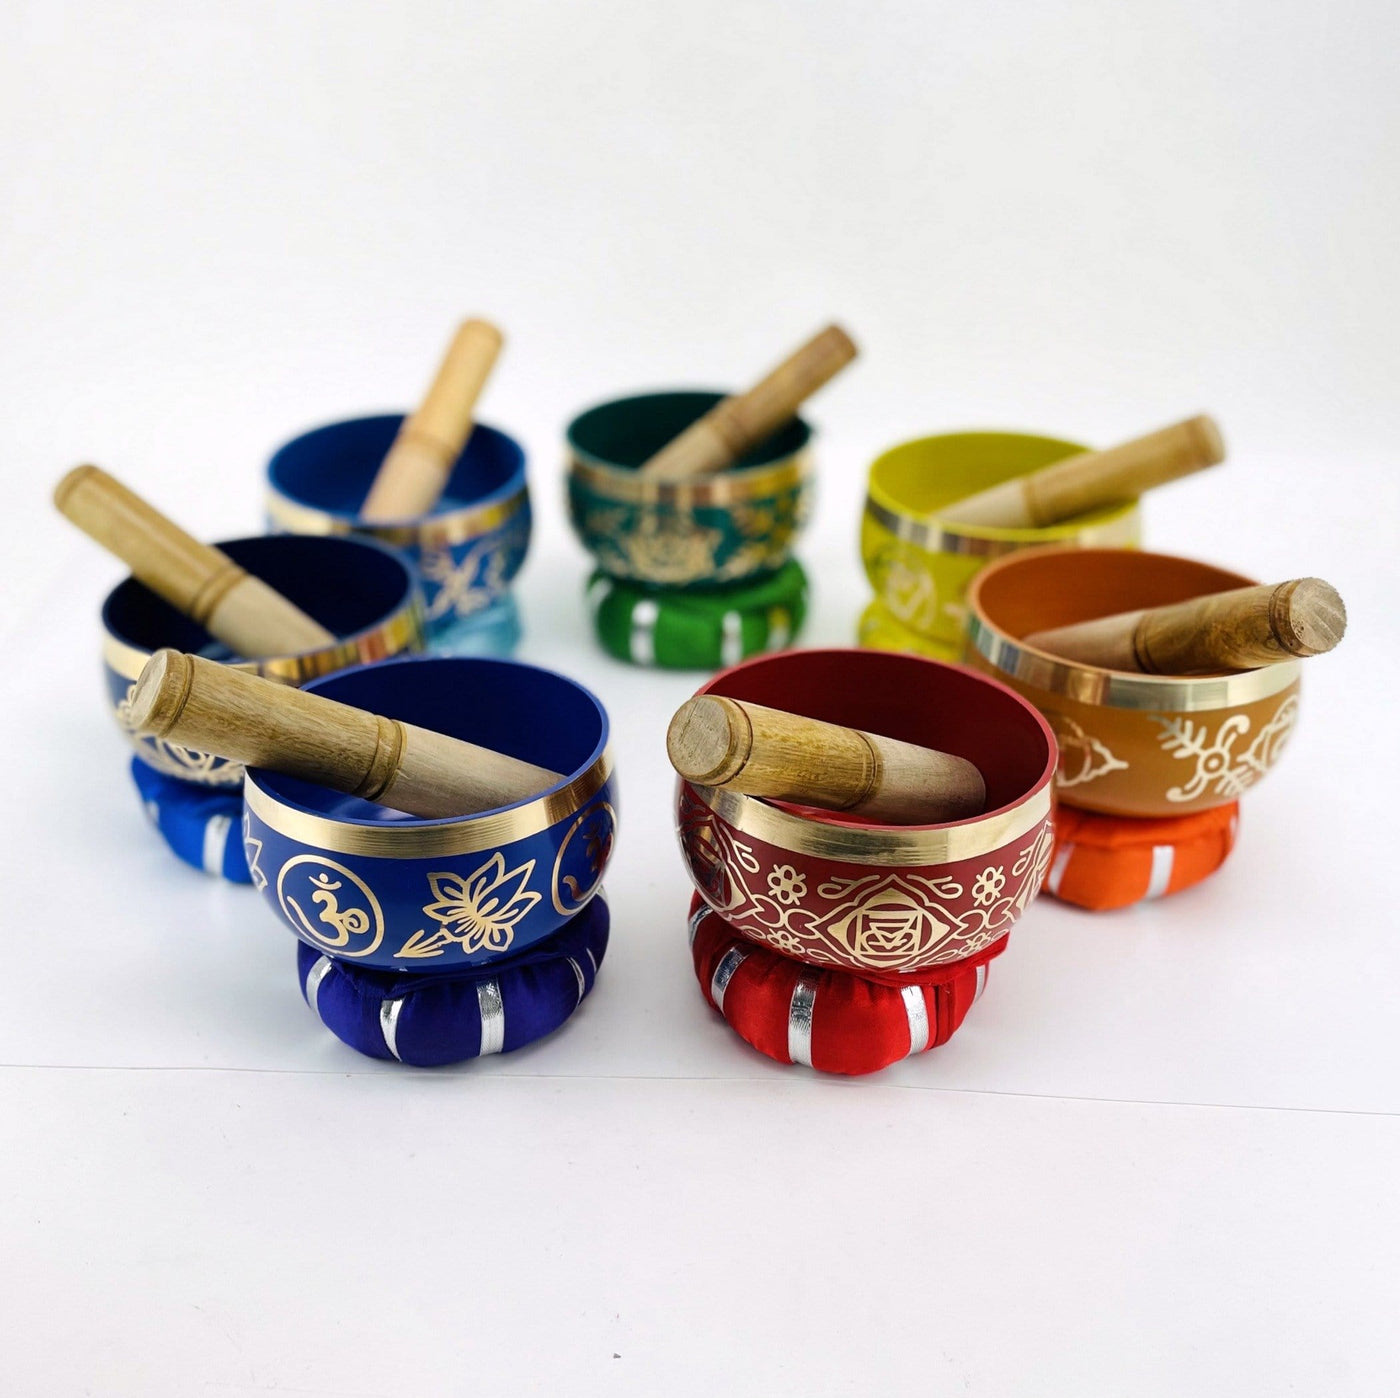 Brass Tibetan Singing Bowls - bowls in a circle with mallets in them